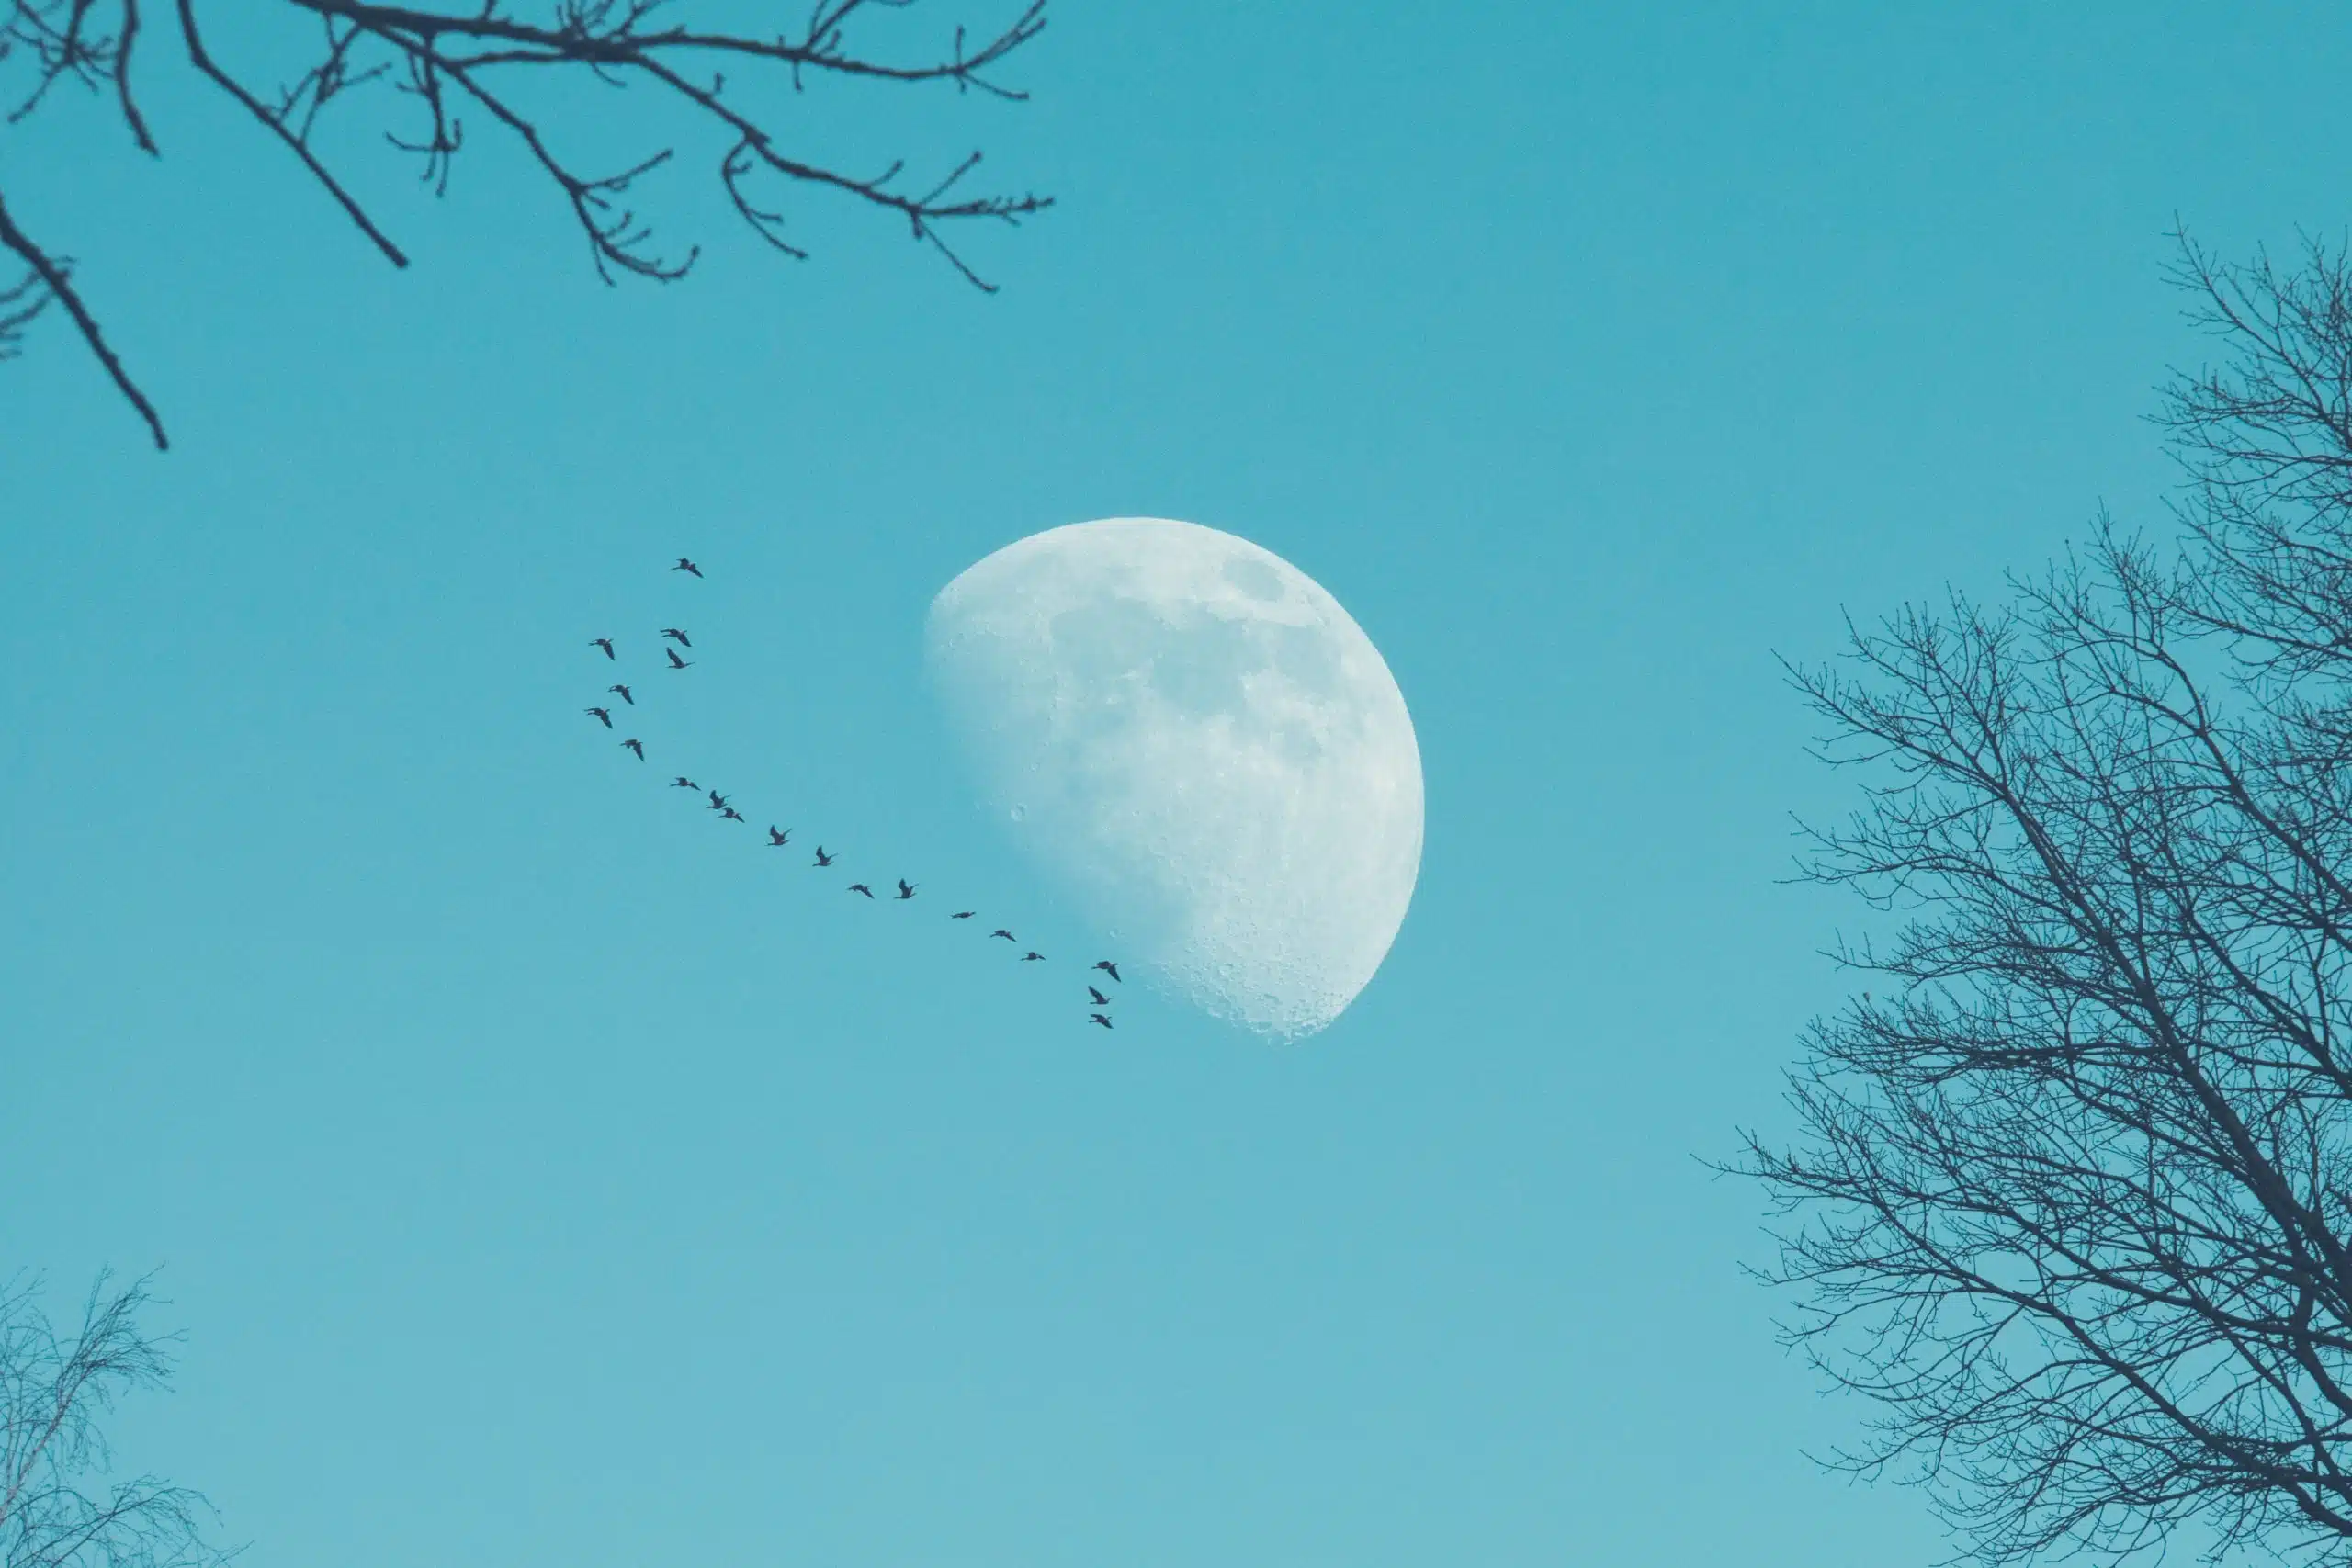 A flock of birds in the pale blue sky and the white moon.